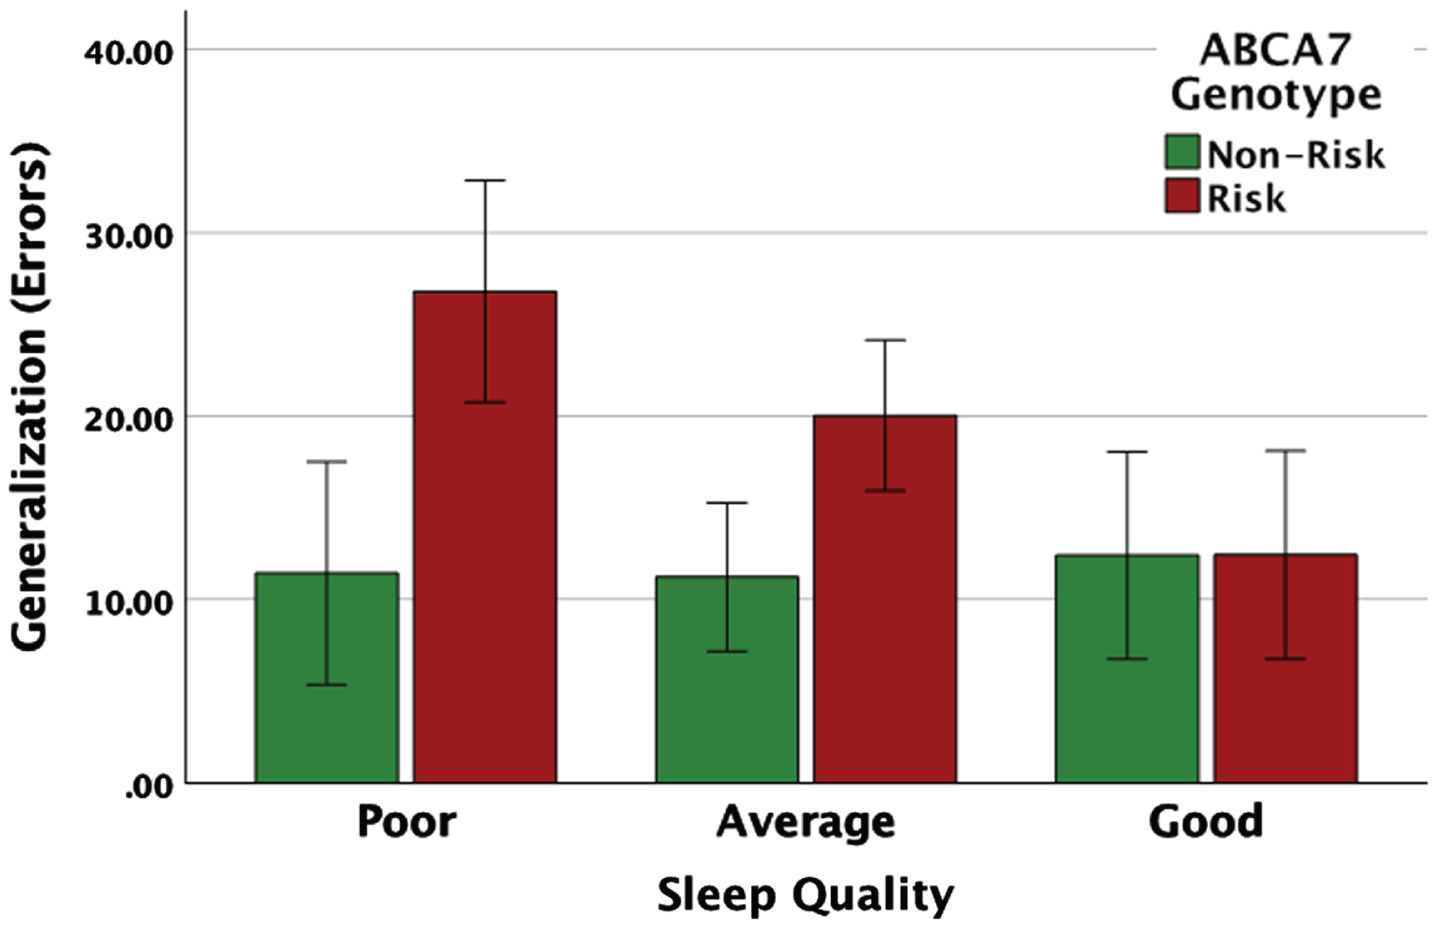 Carriers of the ABCA7 risk genotype made significantly more generalization errors compared to the non-risk individuals if they reported poor or average sleep quality, while for individuals with good sleep quality there was no difference in generalization based on ABCA7 genotype.